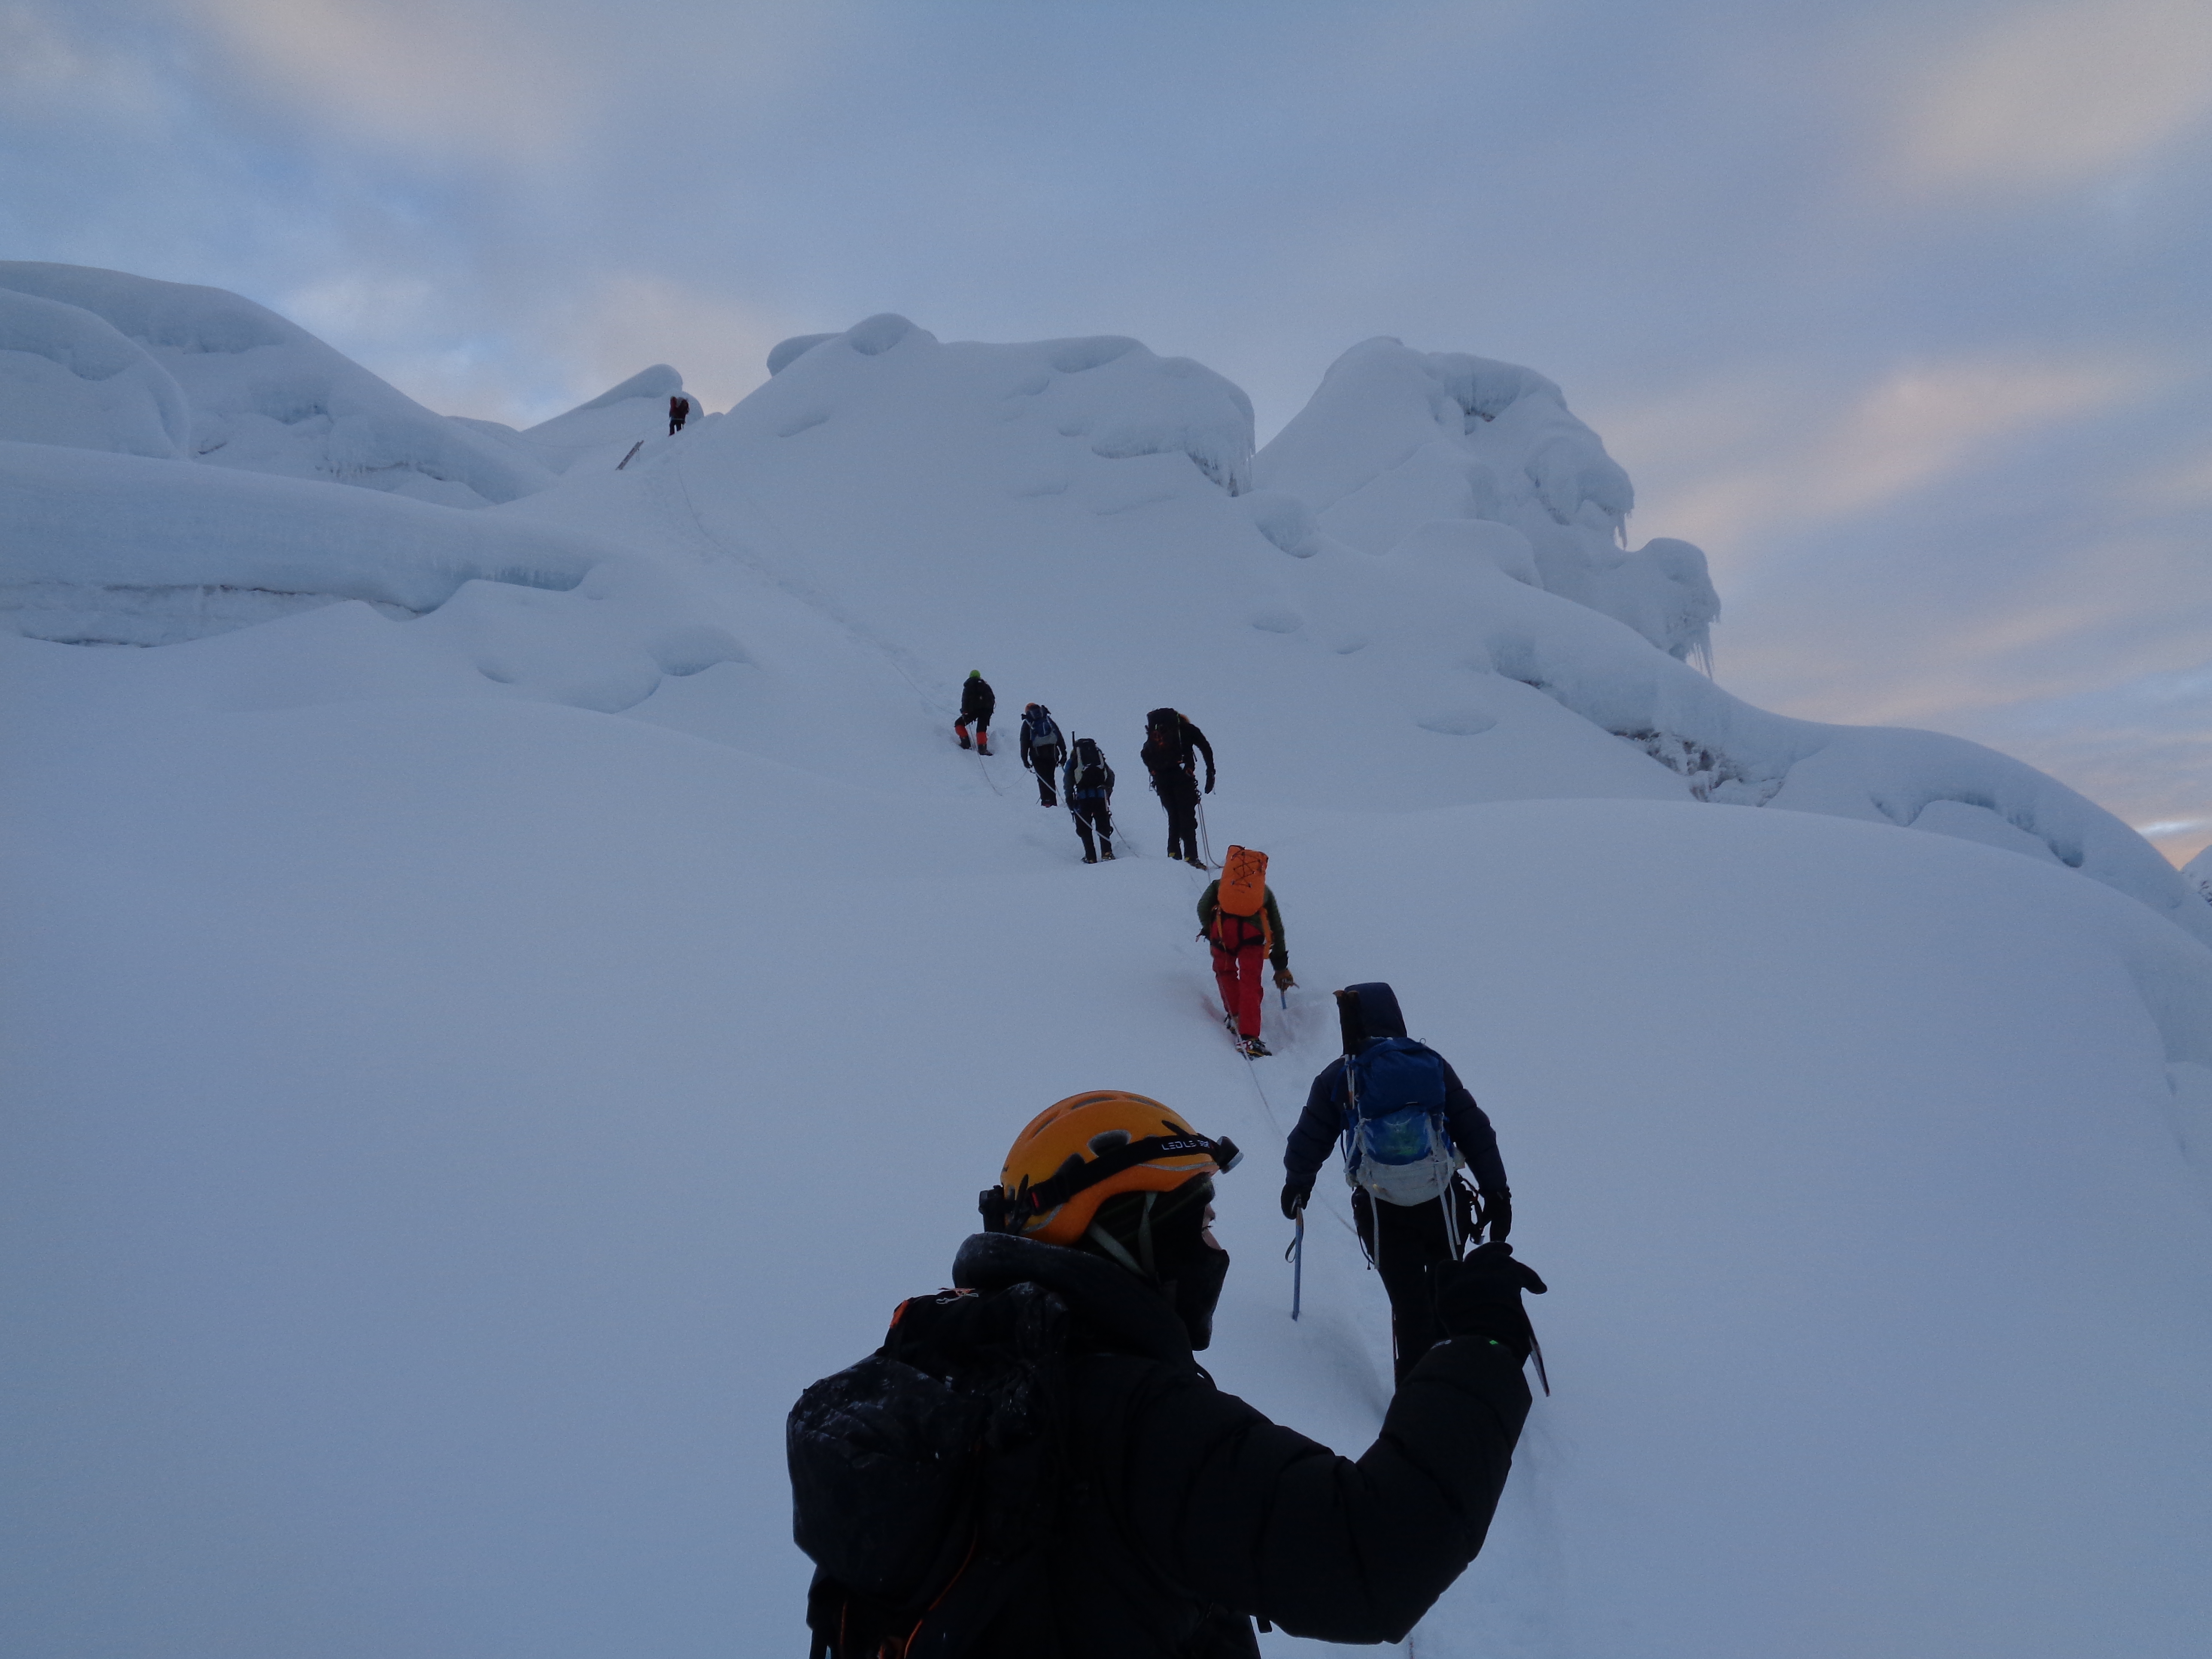 As the sun comes up on Island peak, making our way through the glacier.